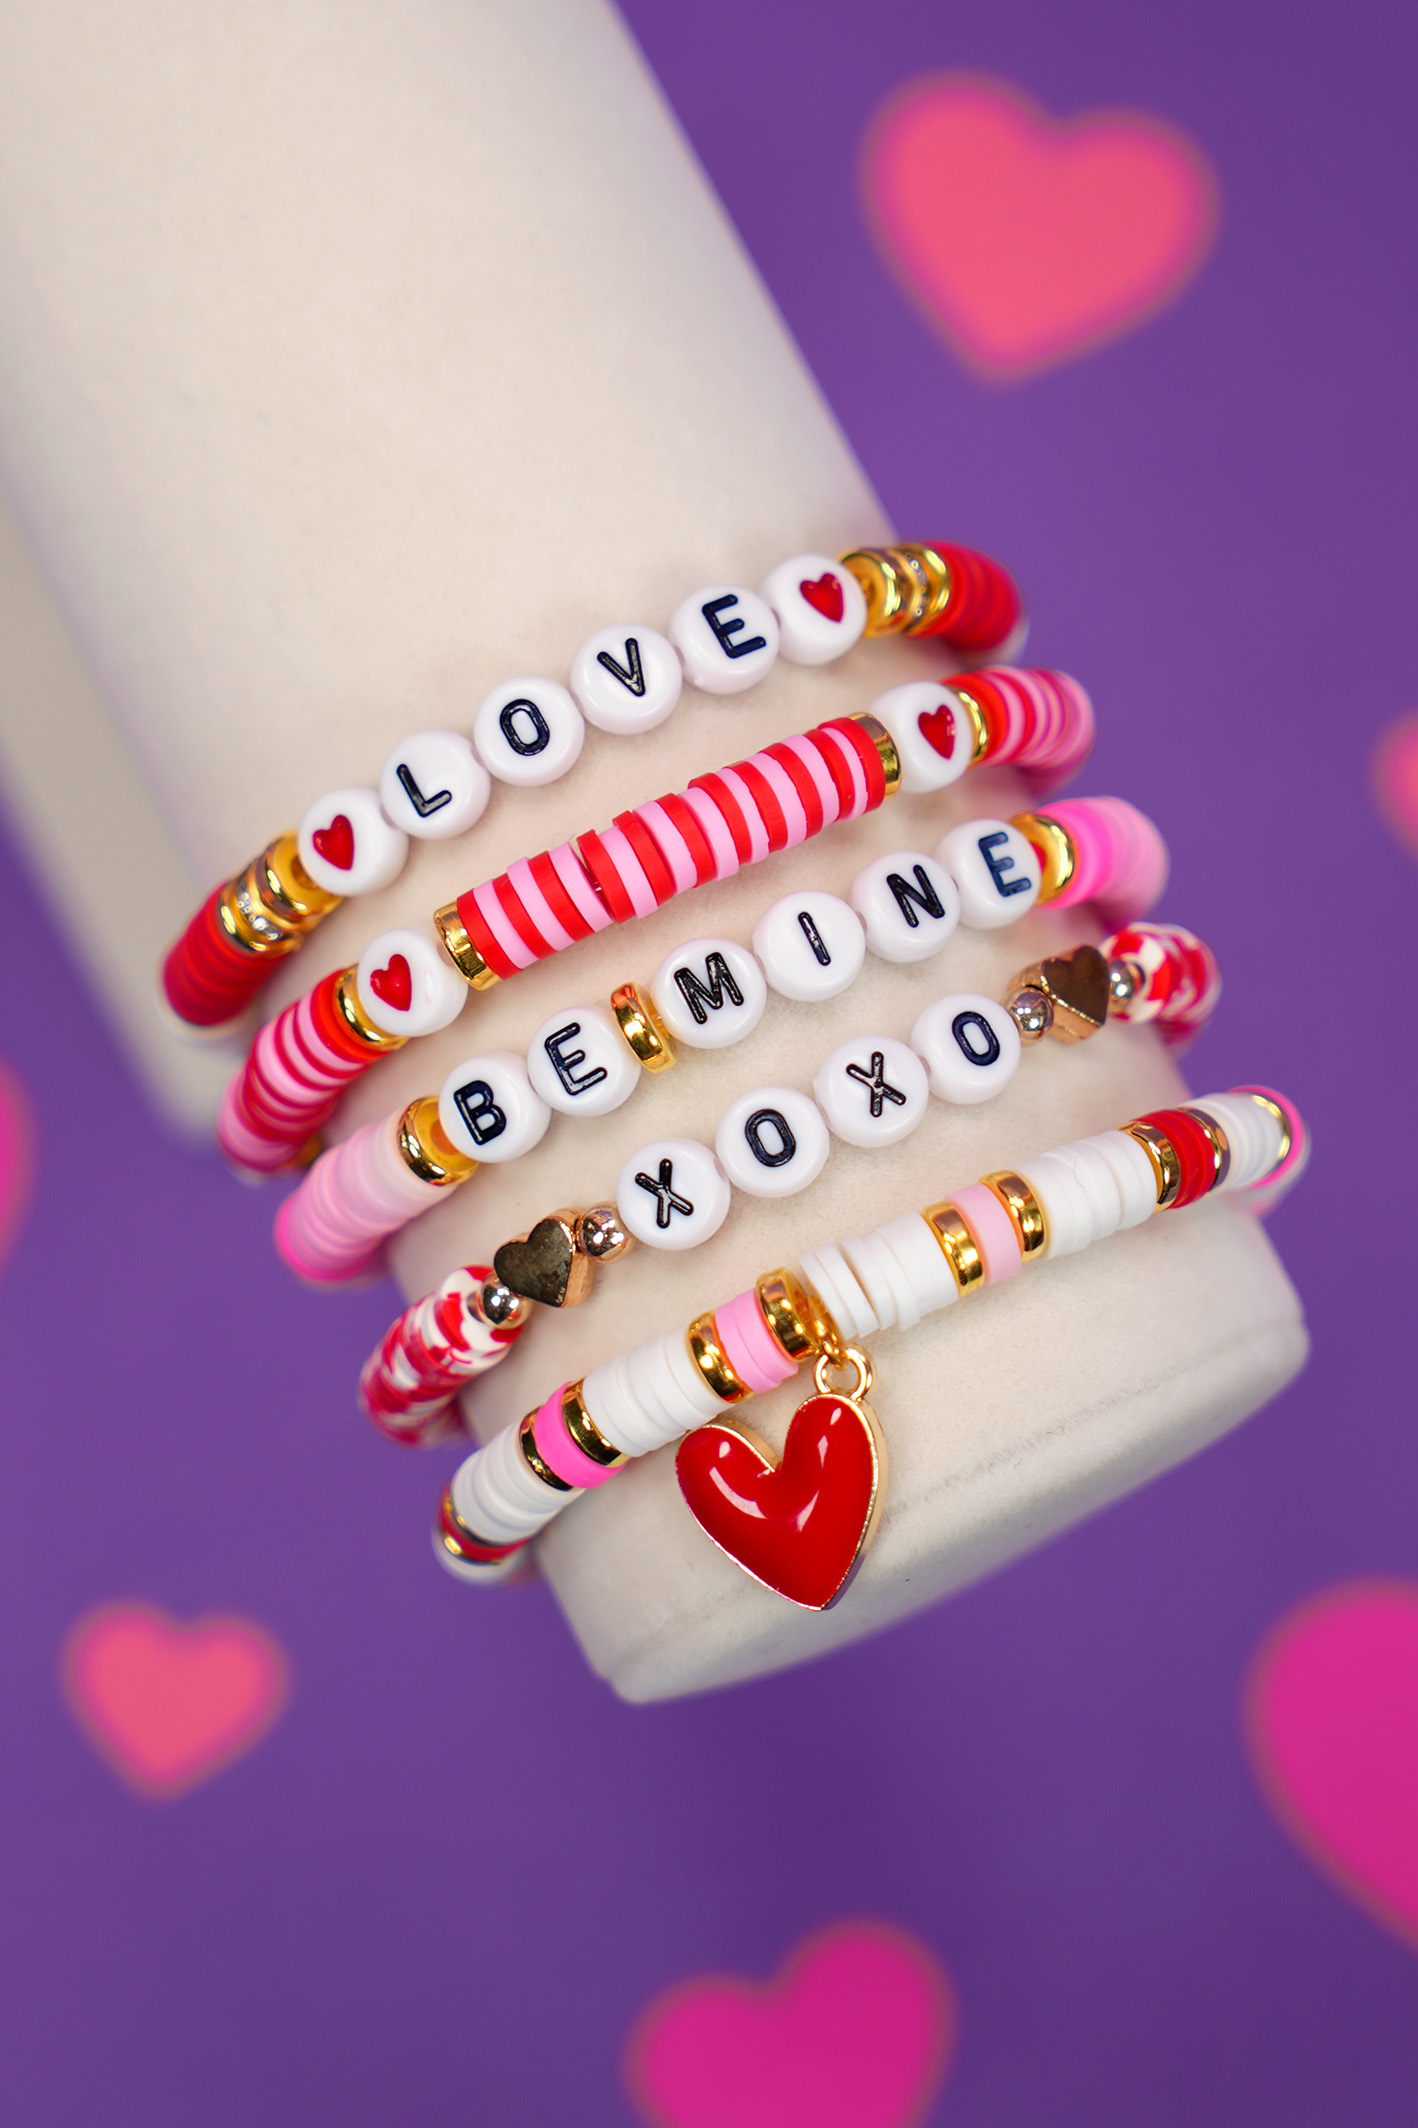 Rubber Band Bracelets: Valentine's Day Craft - The Happy Housewife